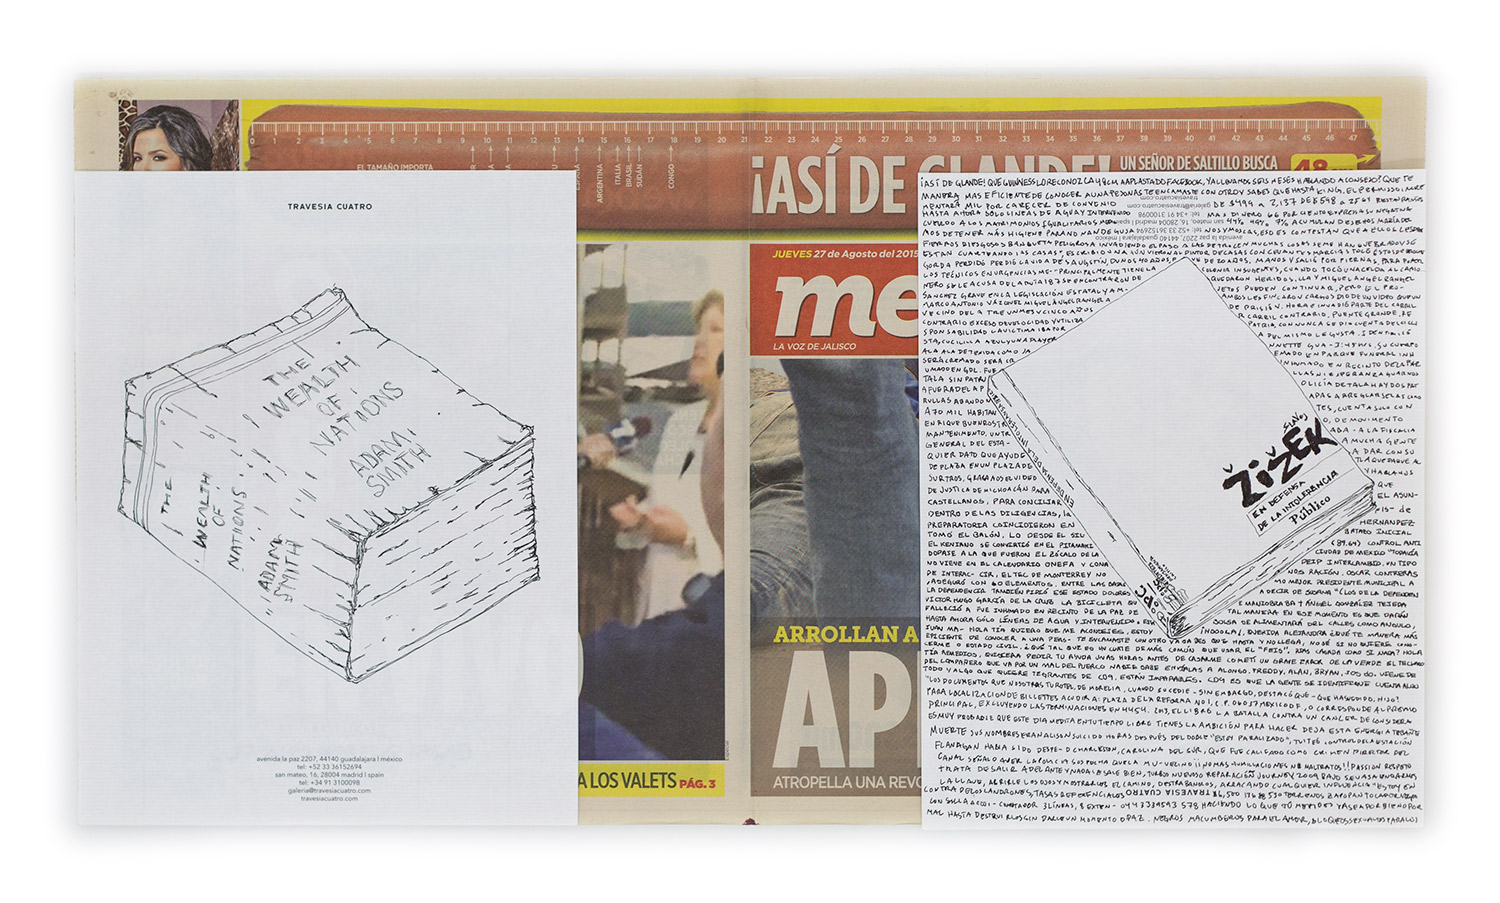   Political Drawing (Metro: Guadalajara, Mexico, Jueves 27 Agosto 2015)   2015  Ink on paper, daily newspaper  12 1/2 x 22 3/4 inches   Drawings, 2014–    Disponibles, 2015     